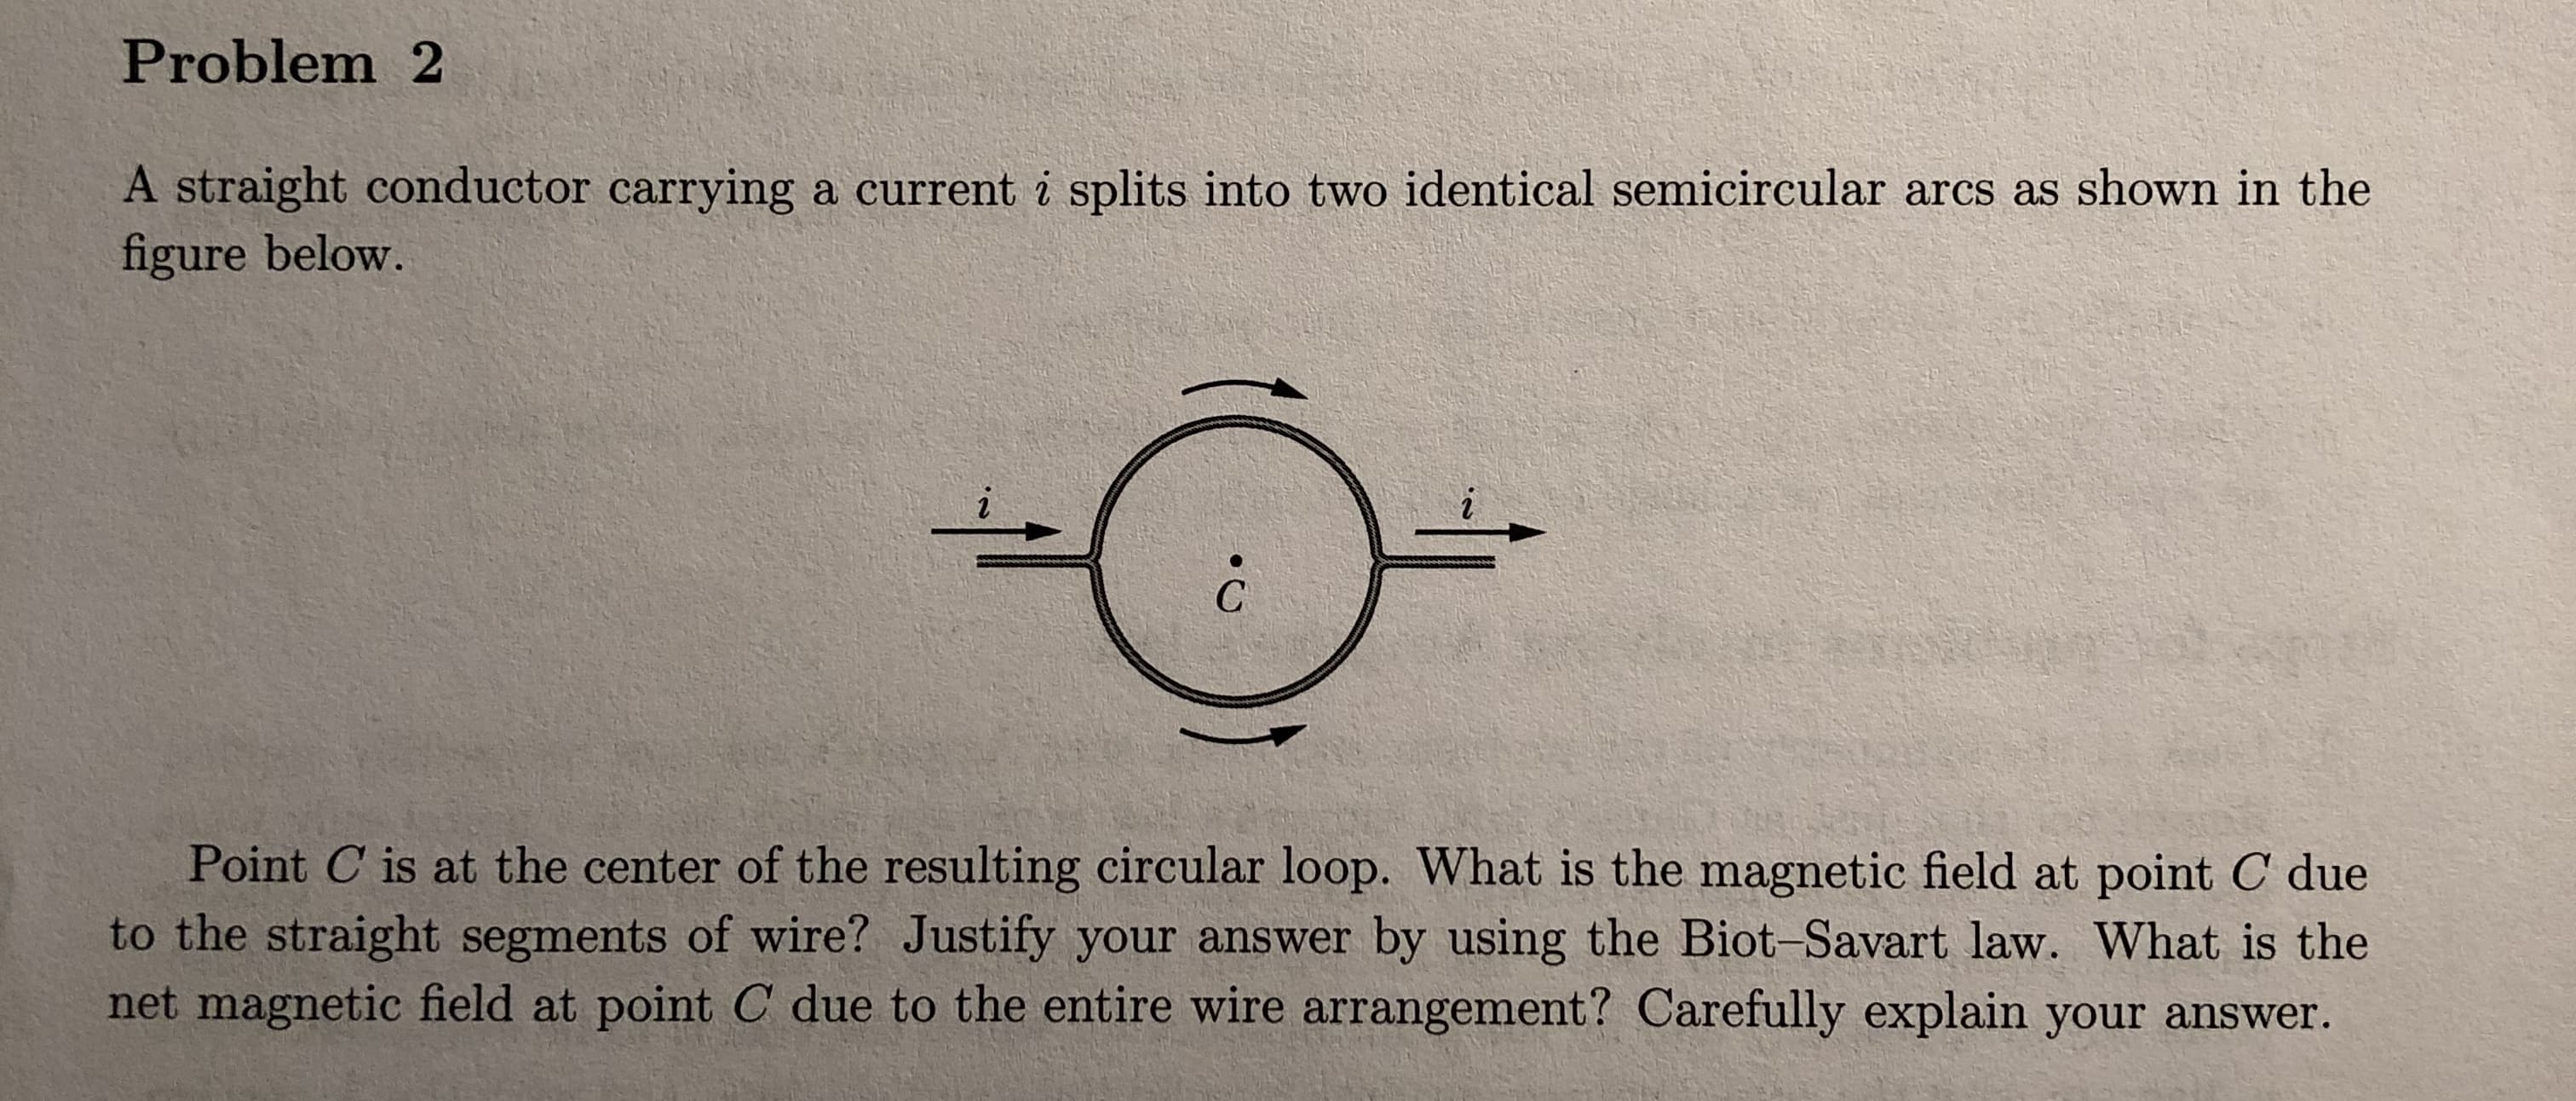 Problem 2
A straight conductor carrying a current i splits into two identical semicircular arcs as shown in the
figure below.
Point C is at the center of the resulting circular loop. What is the magnetic field at point C due
to the straight segments of wire? Justify your answer by using the Biot Savart law. What is the
net magnetic field at point C due to the entire wire arrangement? Carefully explain your answer.
